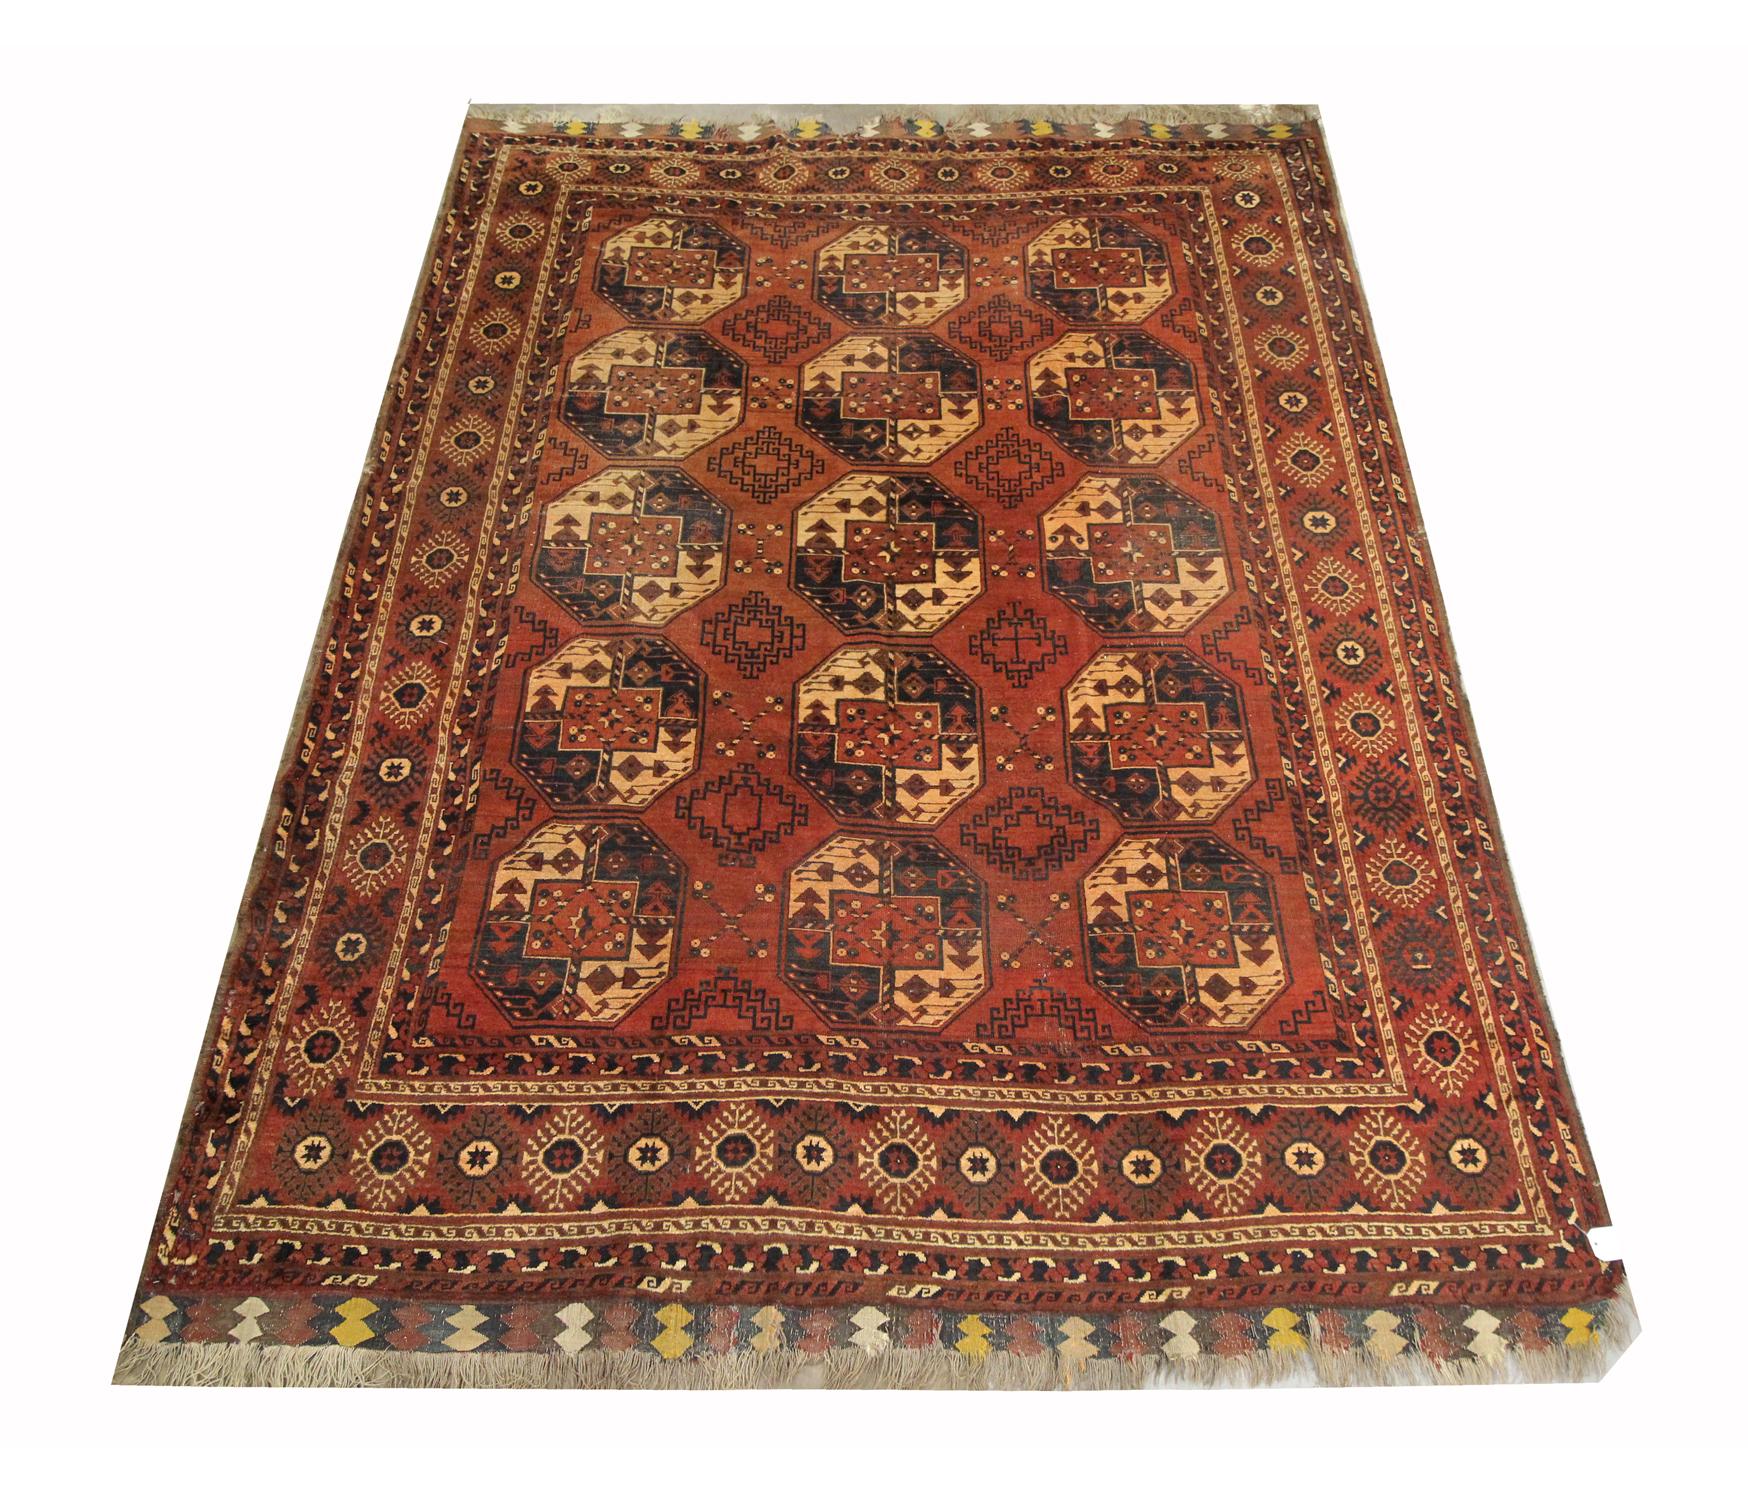 This file wool rug is an antique Turkmen carpet woven by Ersari Turkmens in the 1920s. The central design features a traditional medallion design woven on a rust background in cream and broad blue accents. The Tribal design seen here is traditional